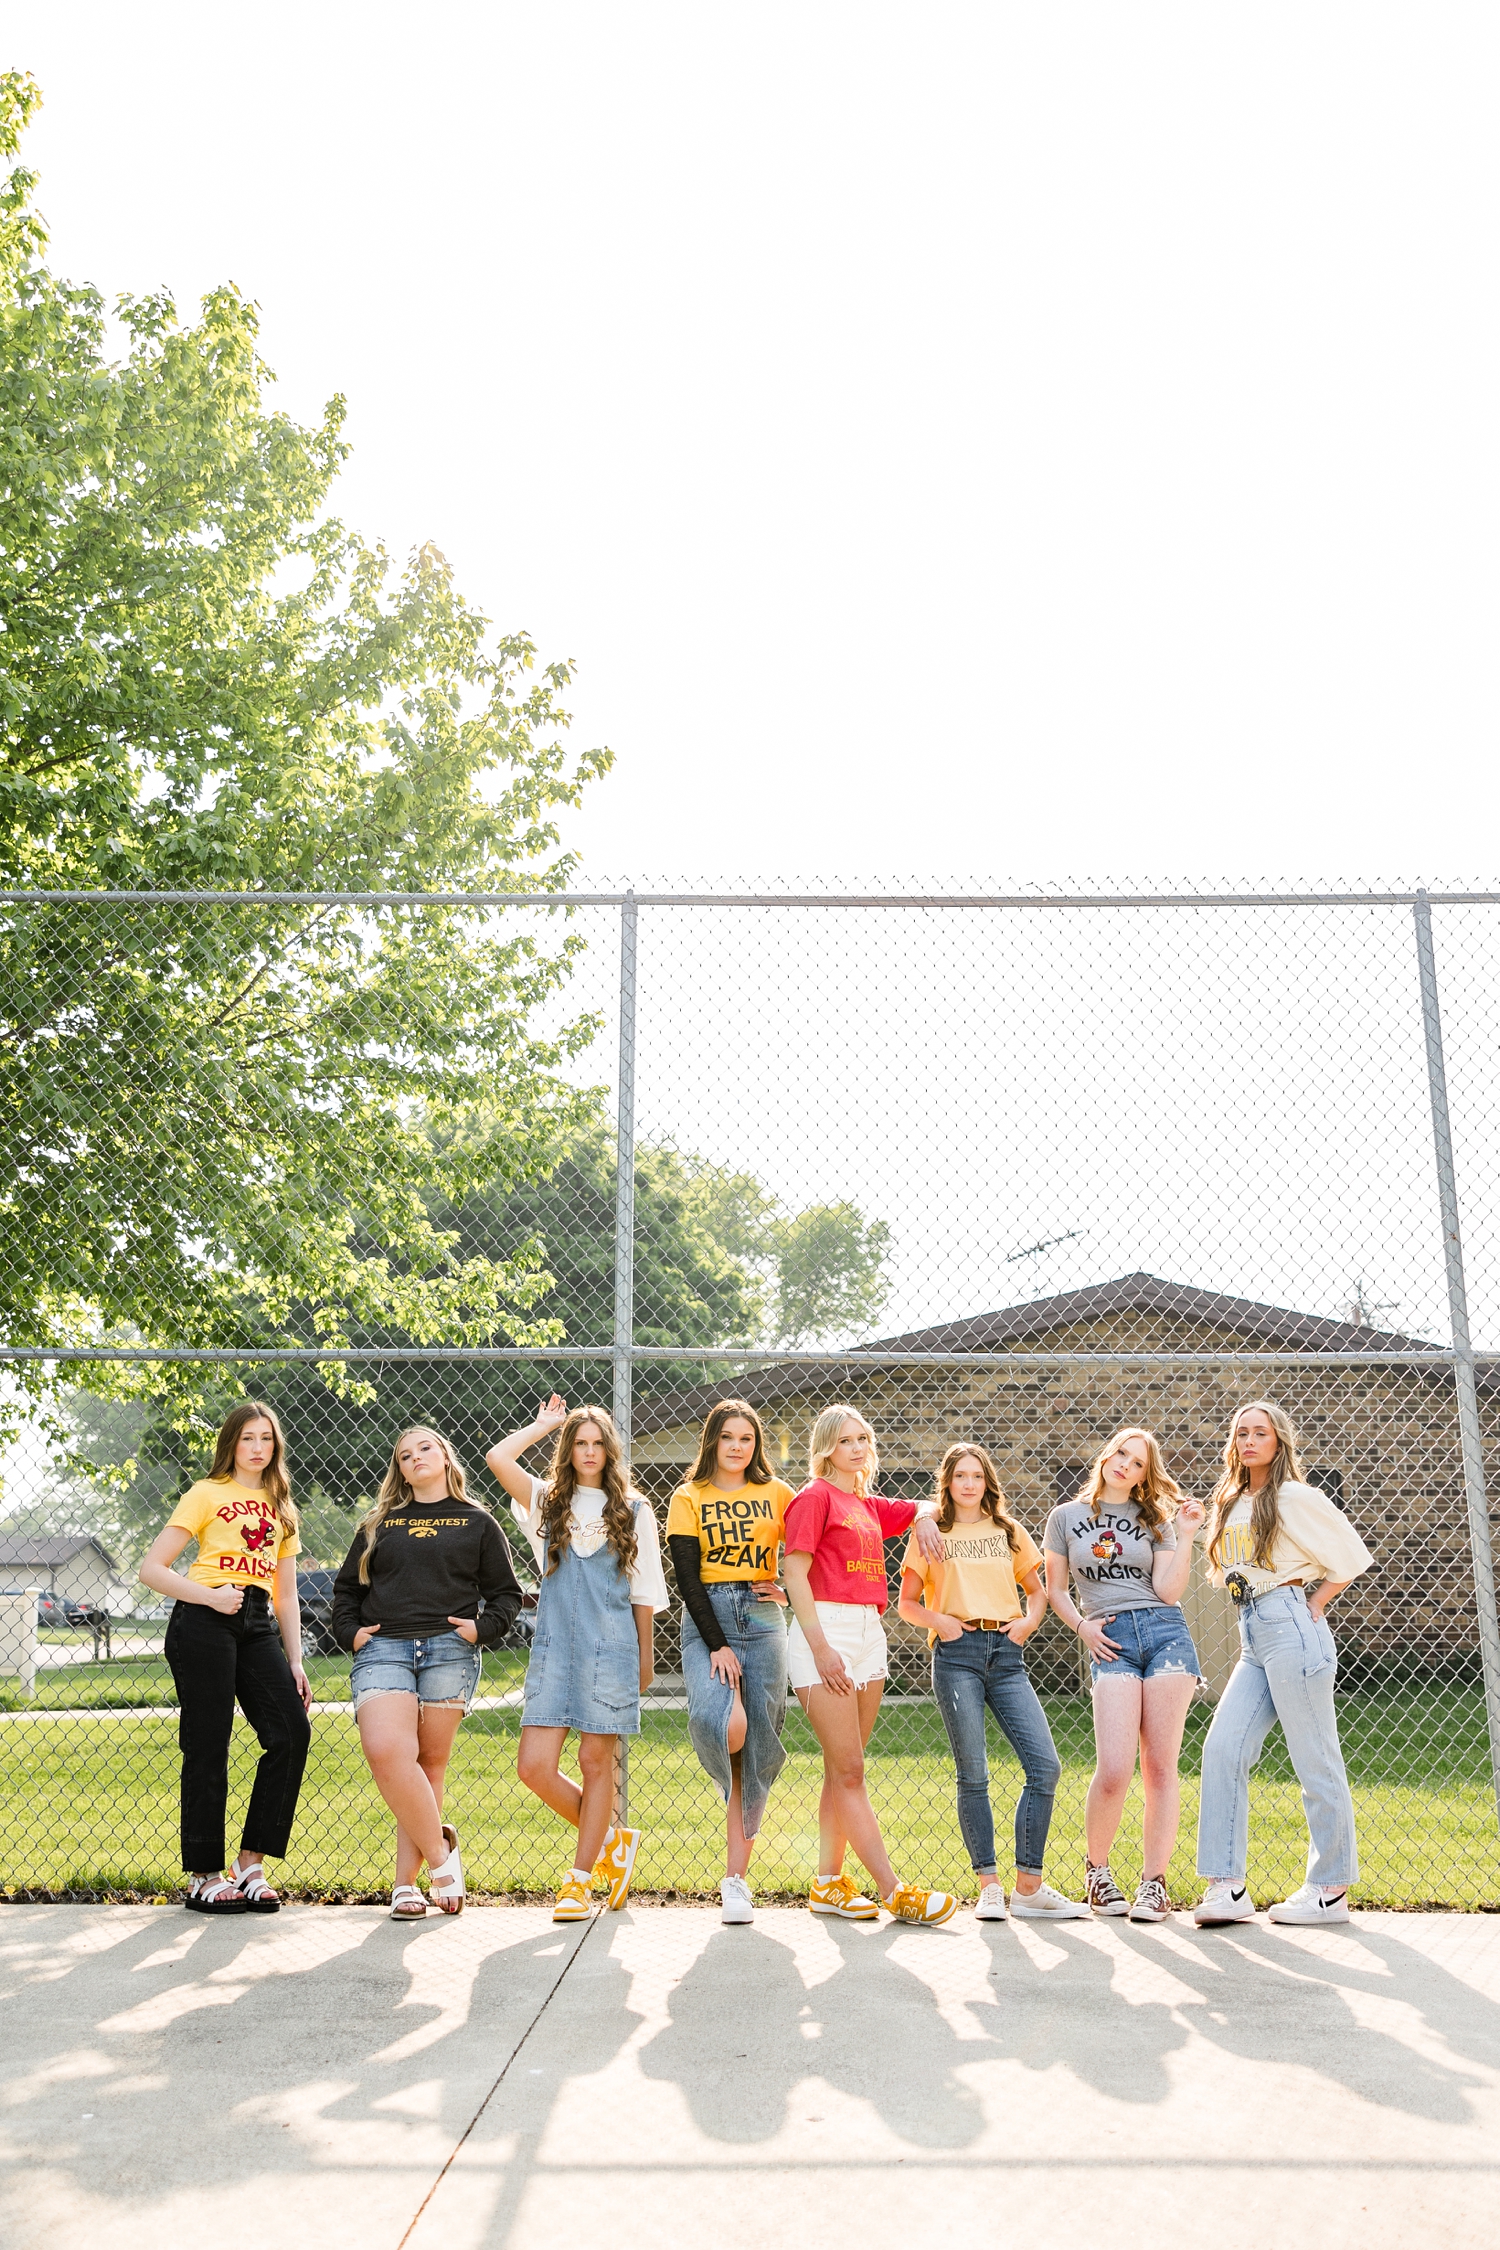 TEAM 25, all wearing Iowa or Iowa State clothing, model pose in a straight line as they lean against a chainlink fence | CB Studio